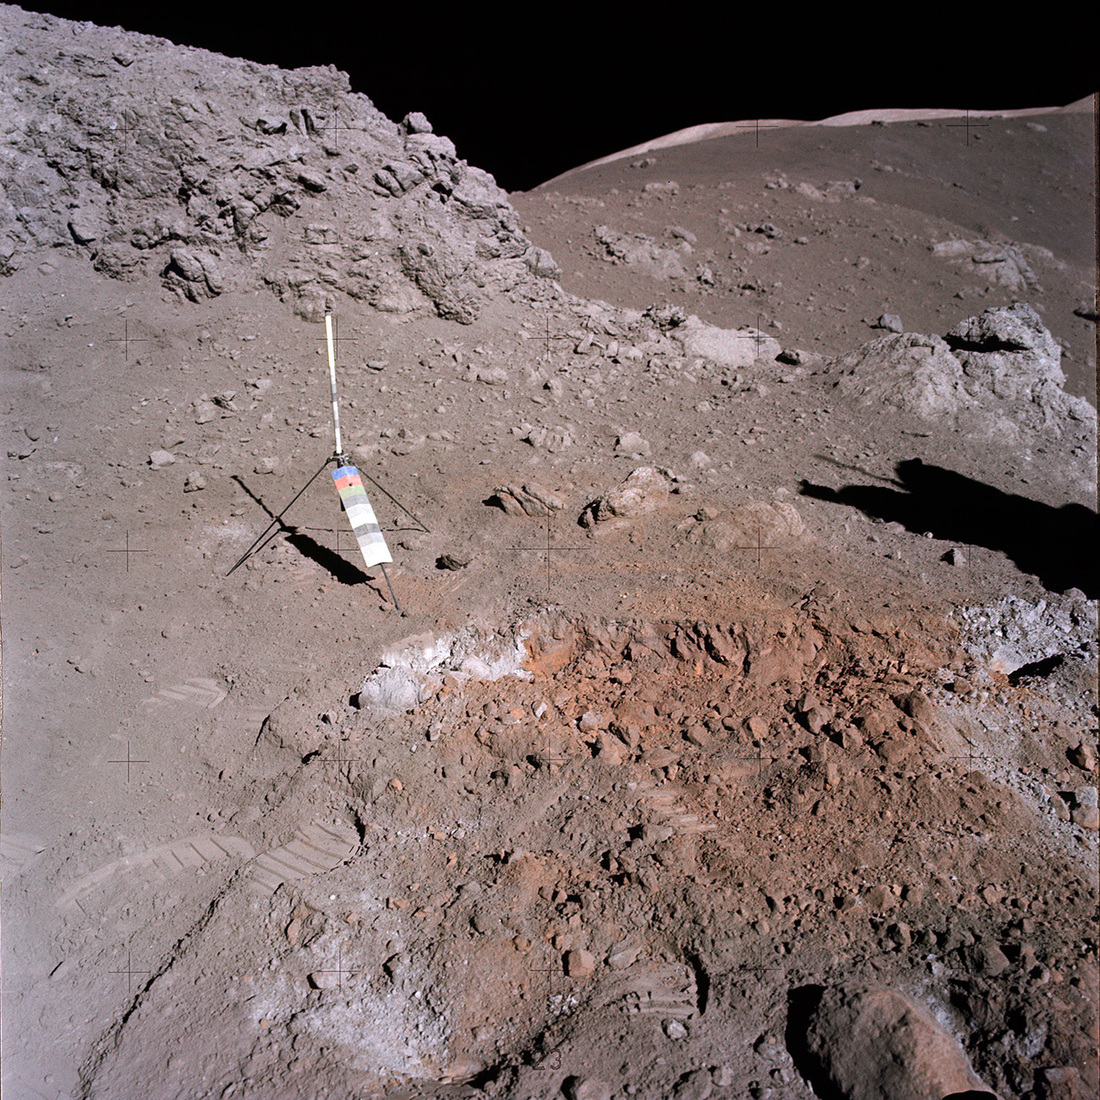 Apollo 17 handheld image AS17-137-20990 of the orange material discovered by Jack Schmitt at Shorty crater during EVA 2 in the Taurus-Littrow Valley on the Moon.